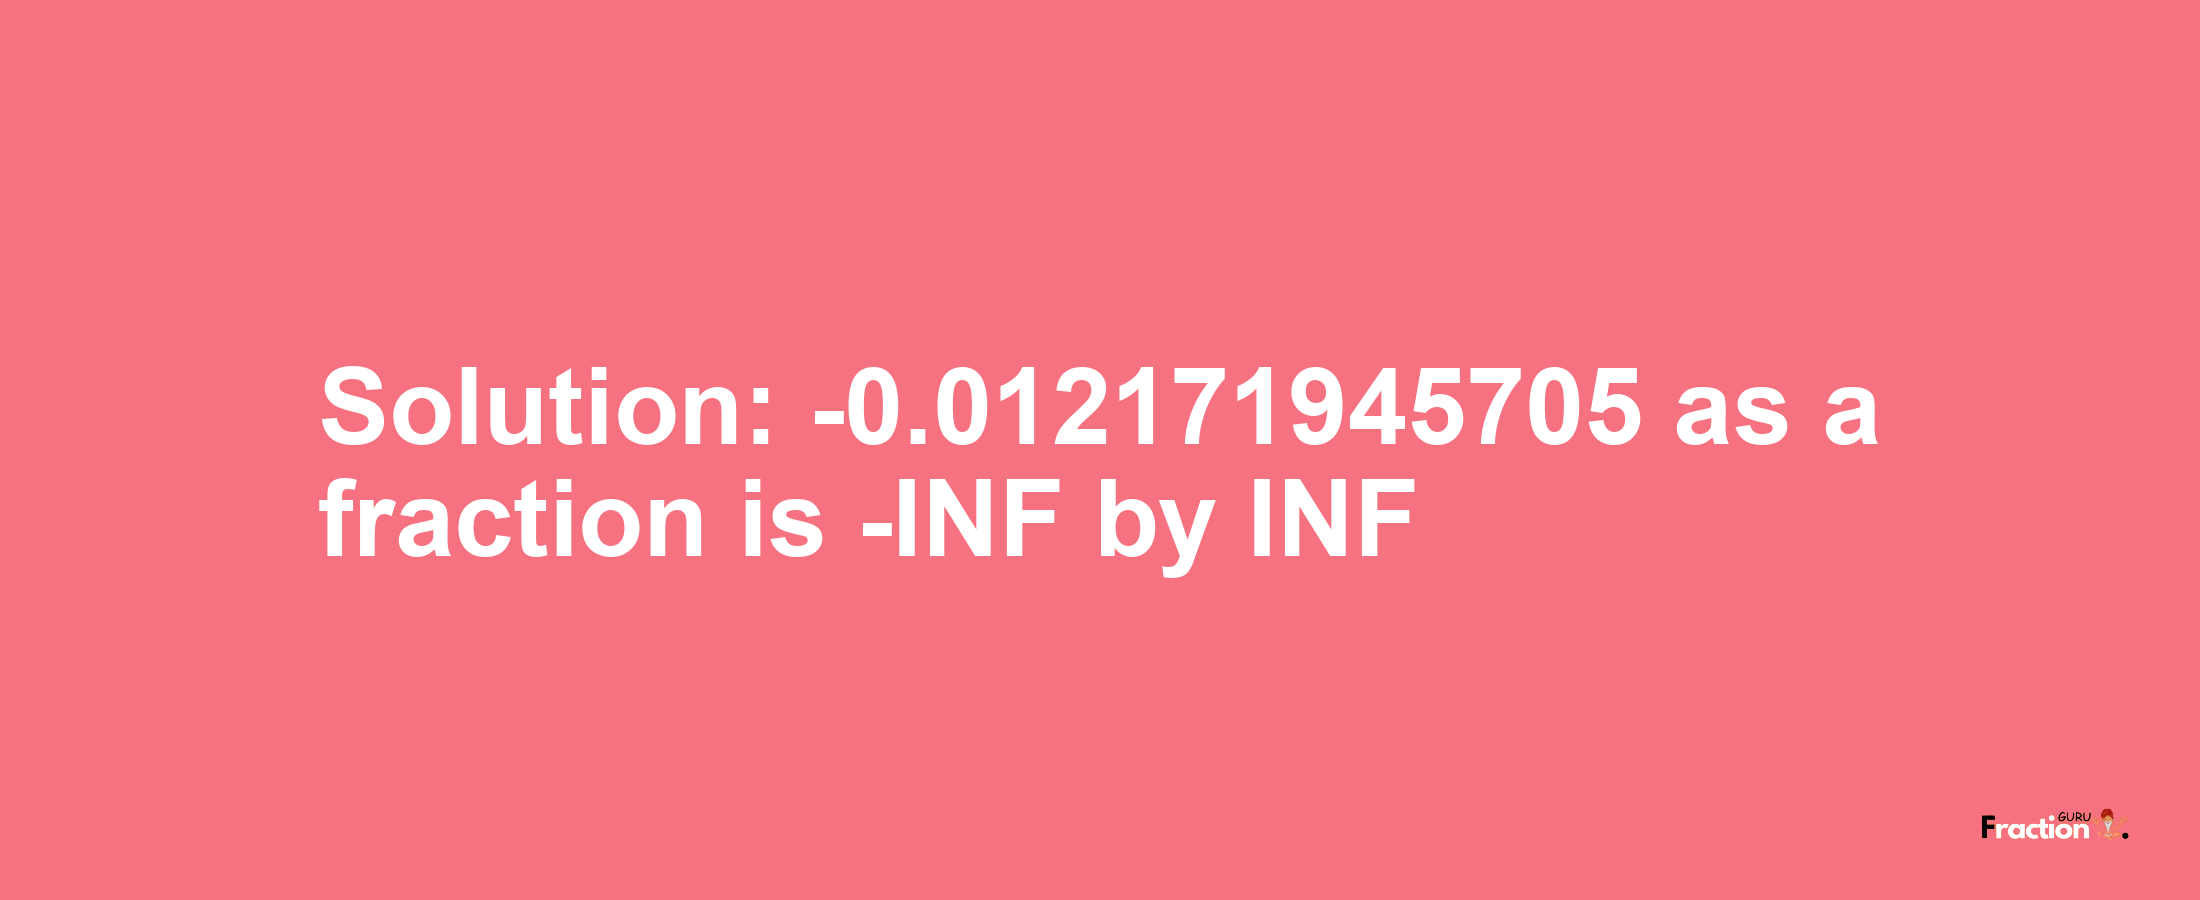 Solution:-0.012171945705 as a fraction is -INF/INF